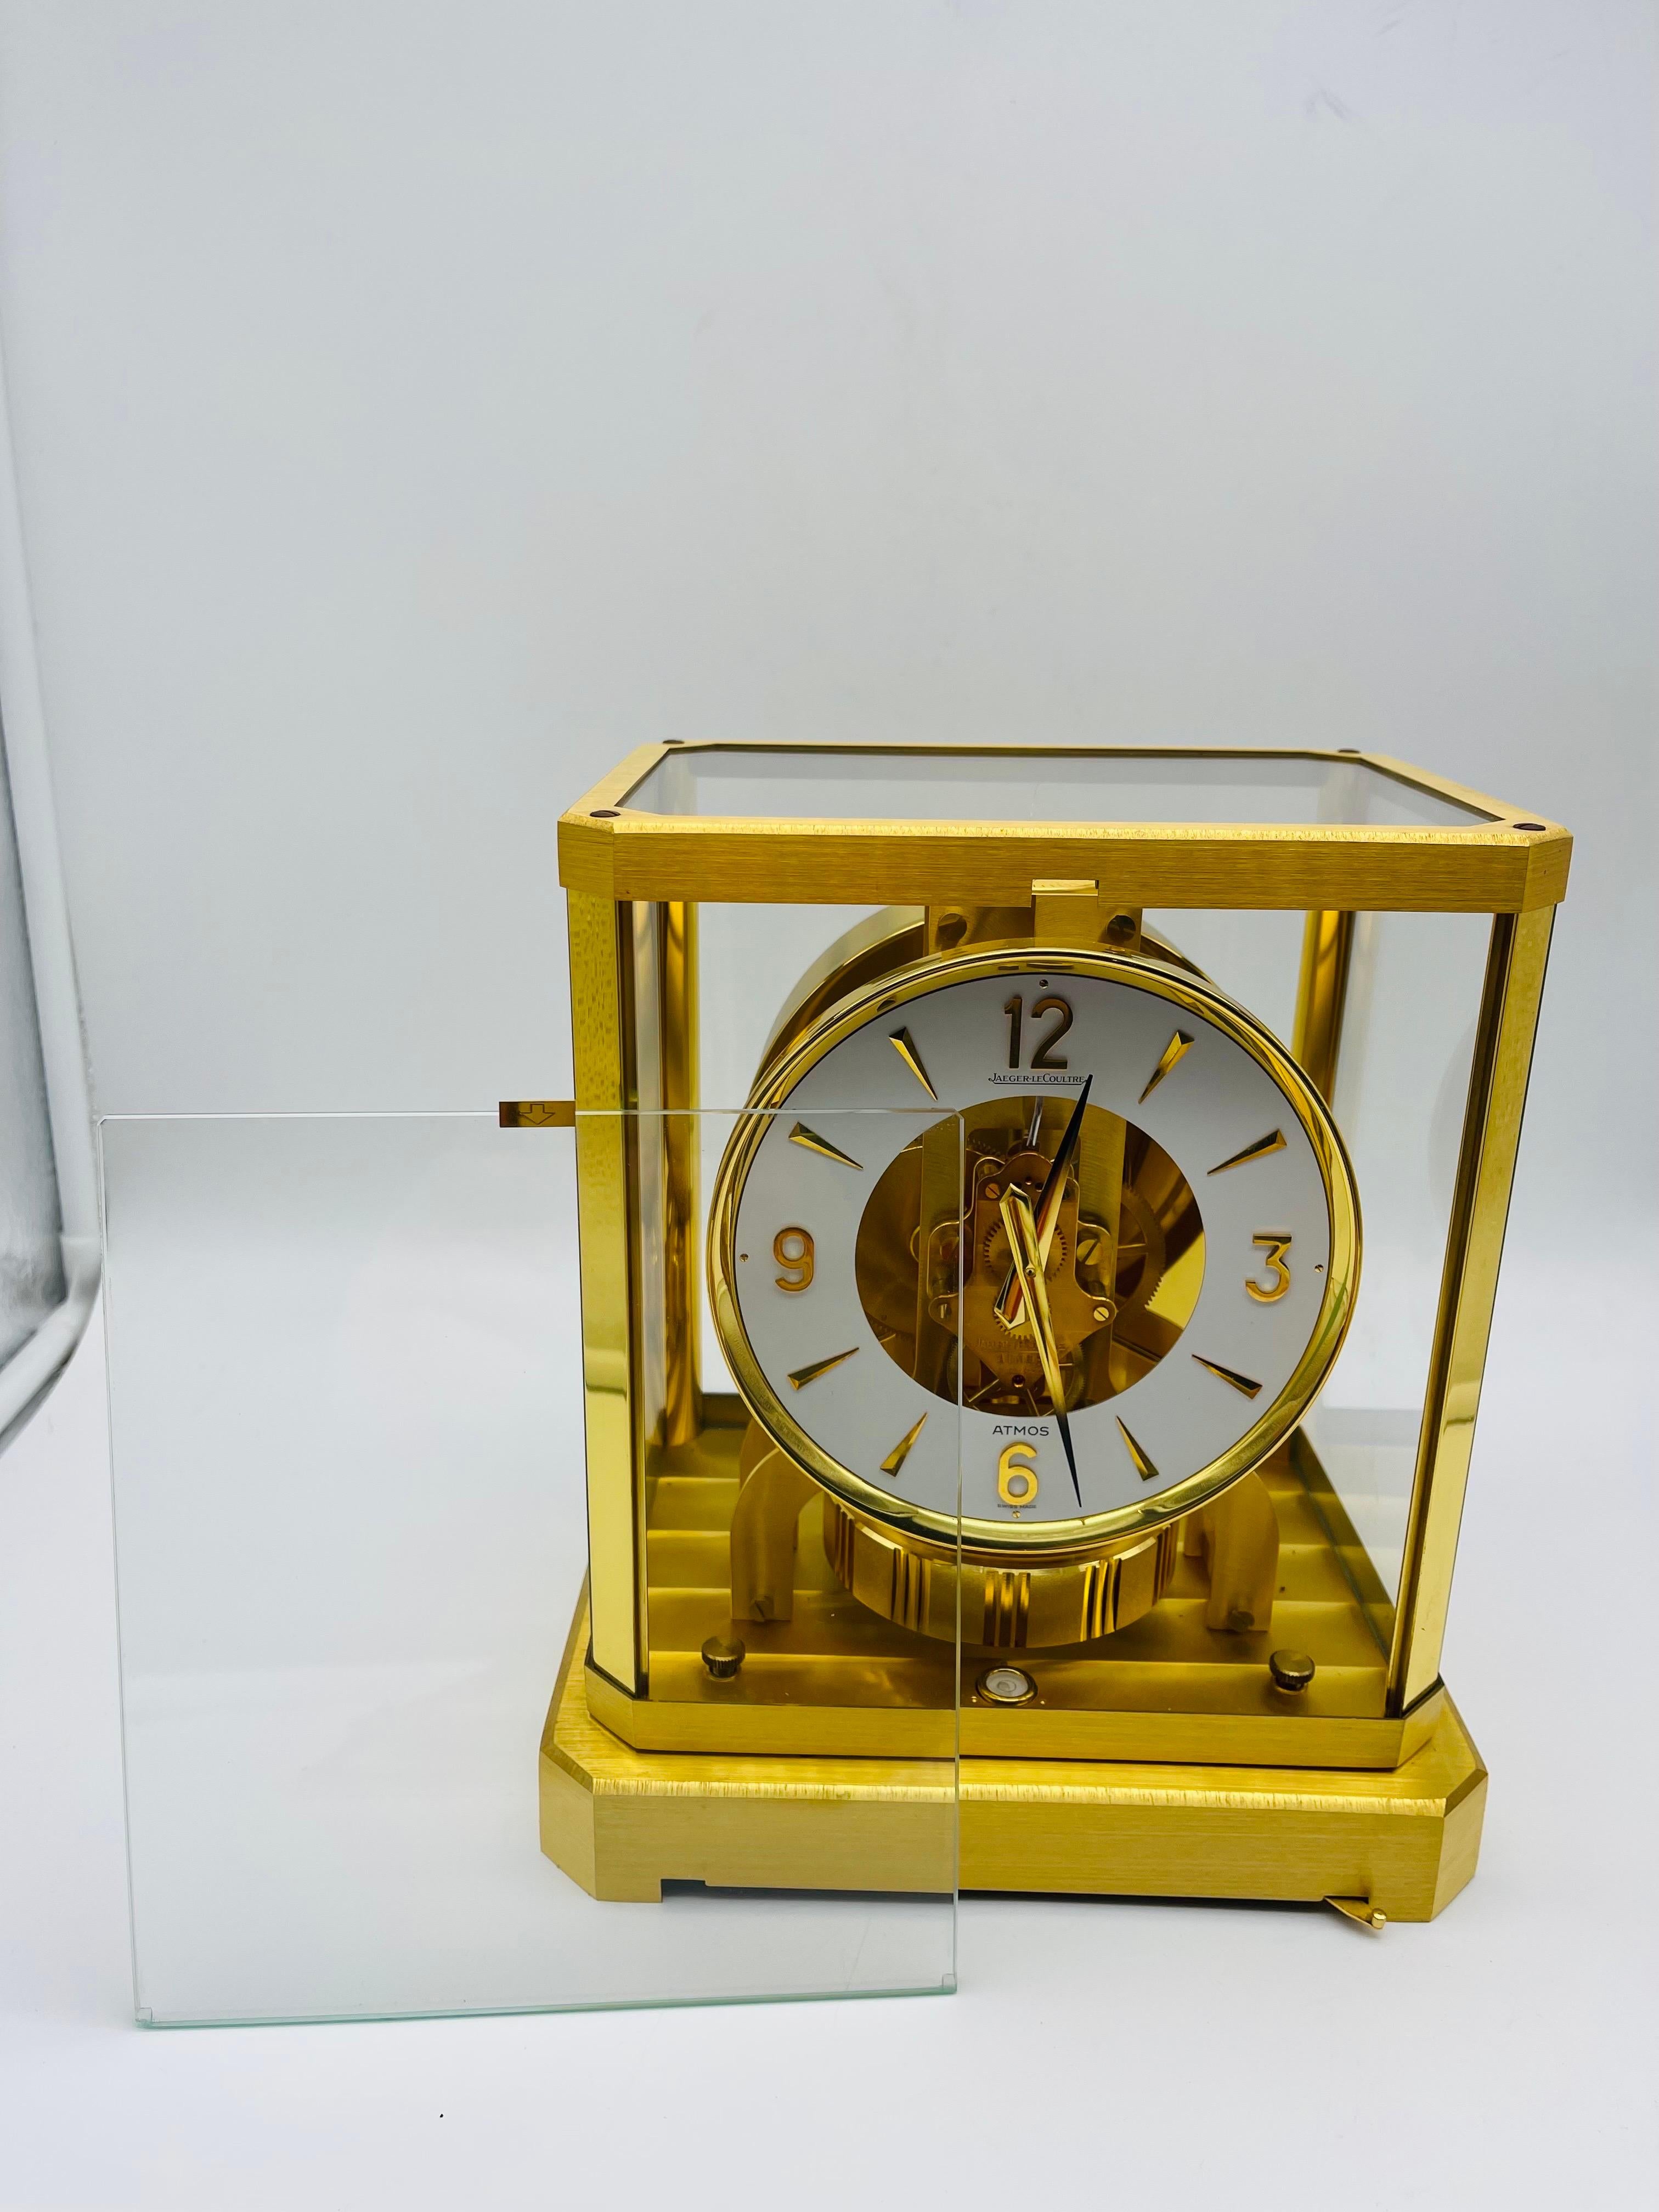 Atmos Jaeger Le Coultre Fireplace Clock Cal. 528 For Sale 1